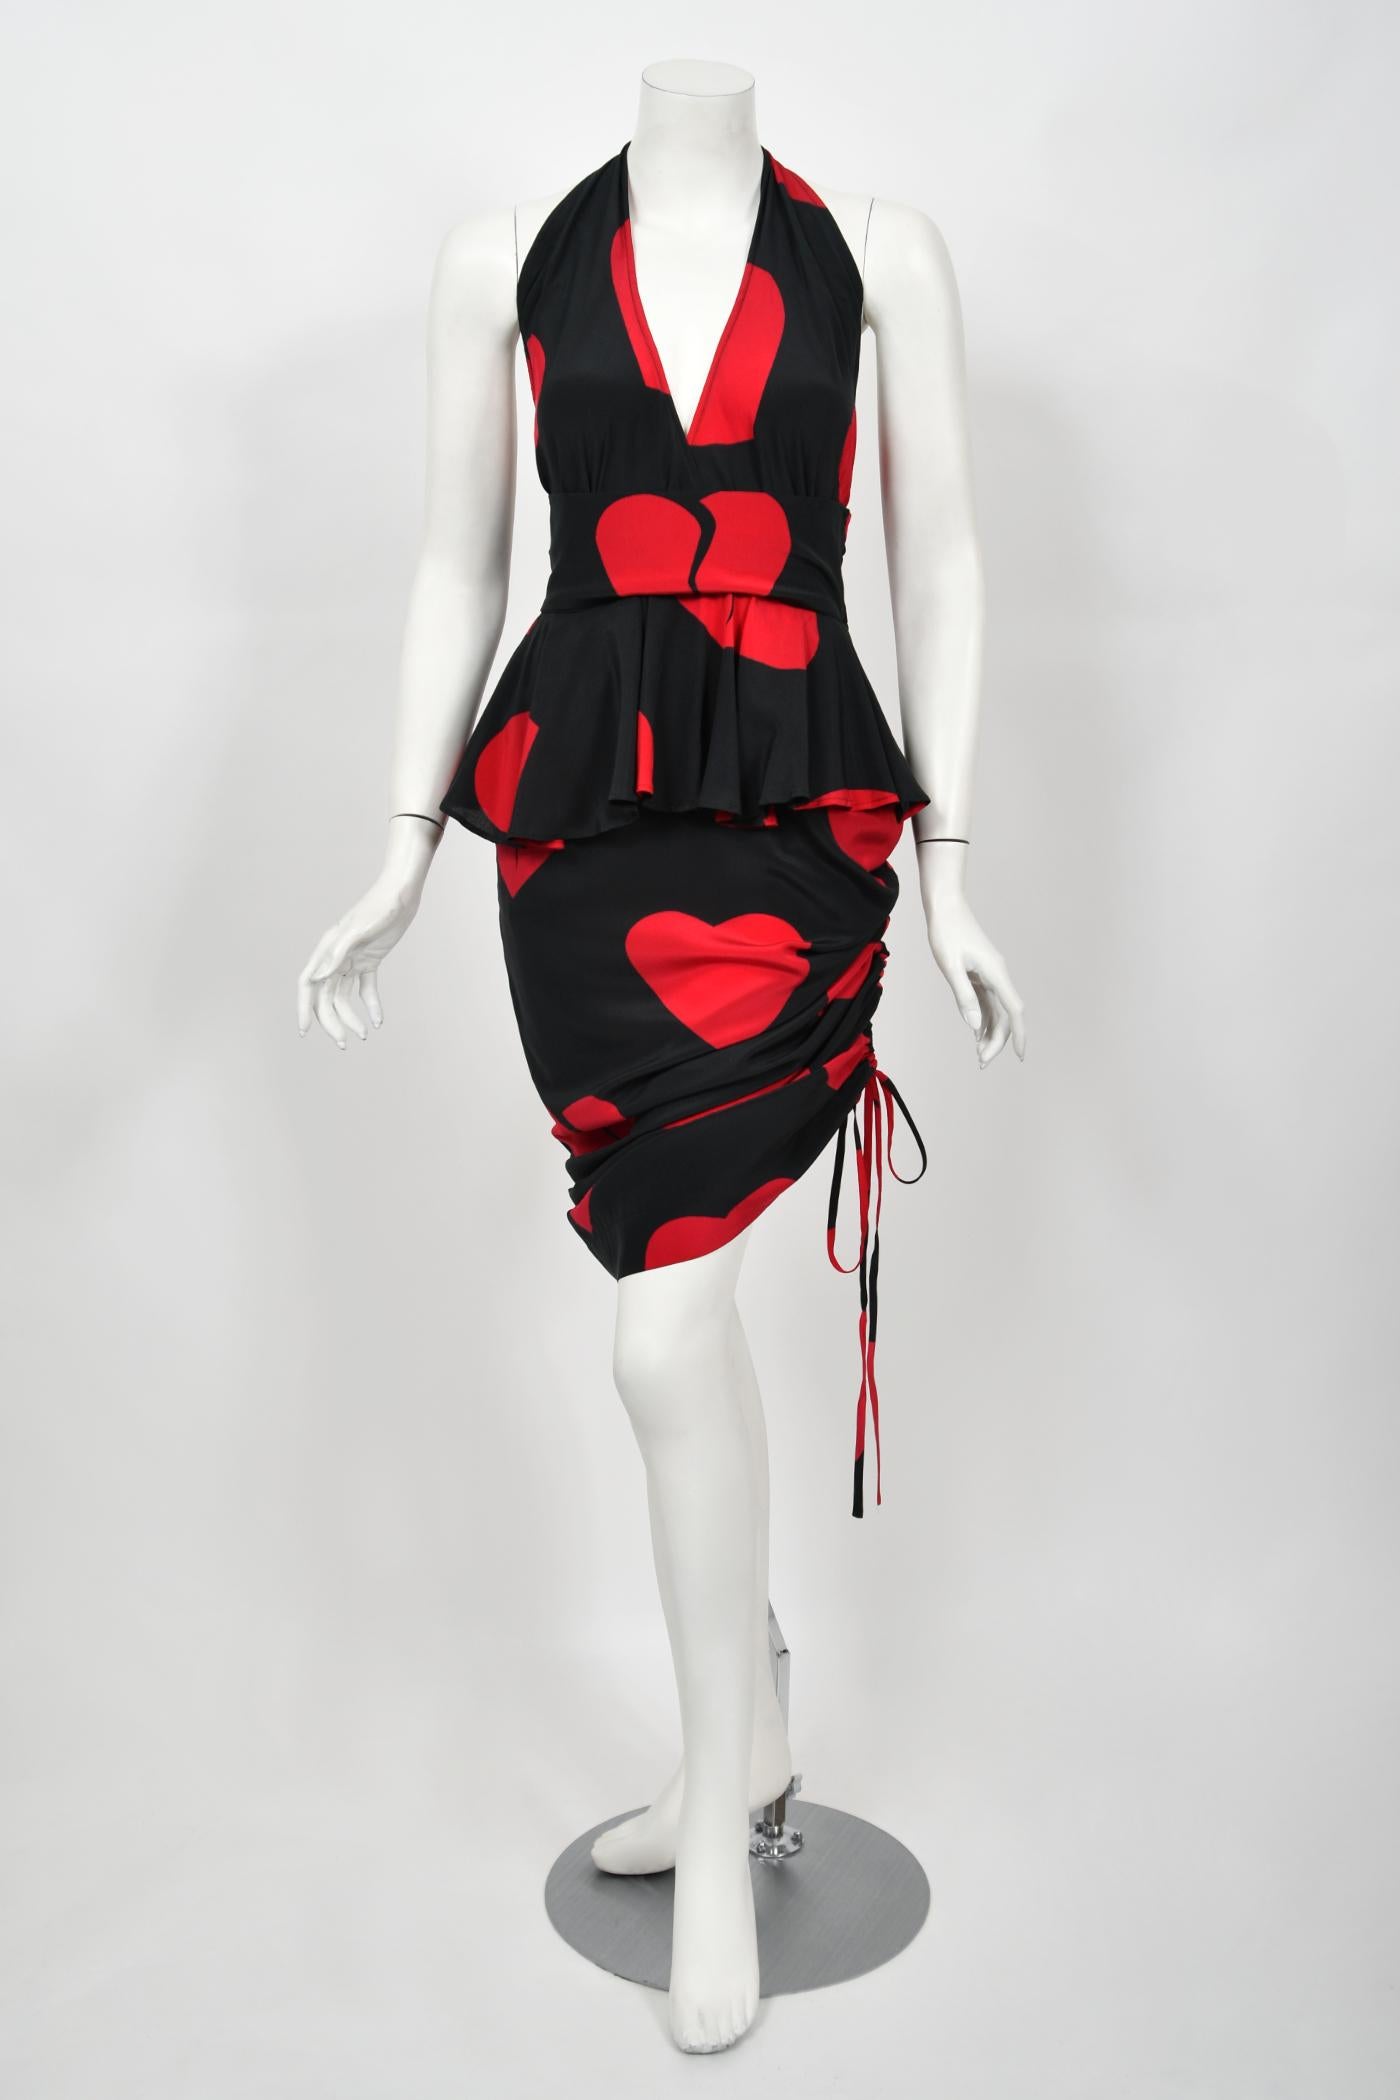 1994 Moschino Couture Documented 'Heartbreaker' Print Silk Convertible Dress  For Sale 2